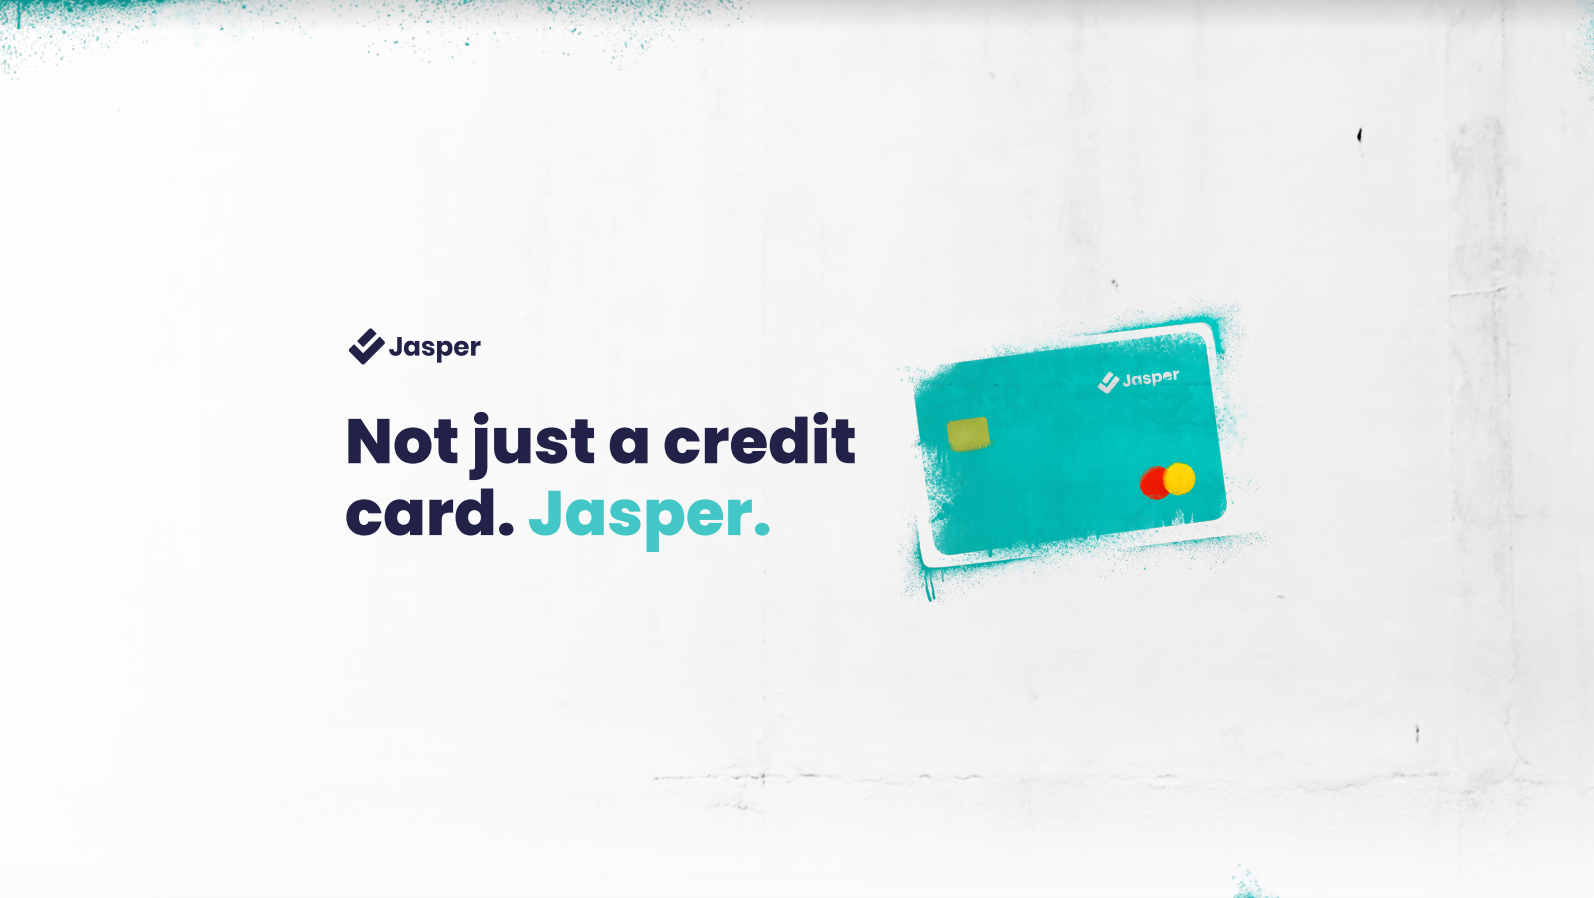 See How to Apply for a Jasper Credit Card